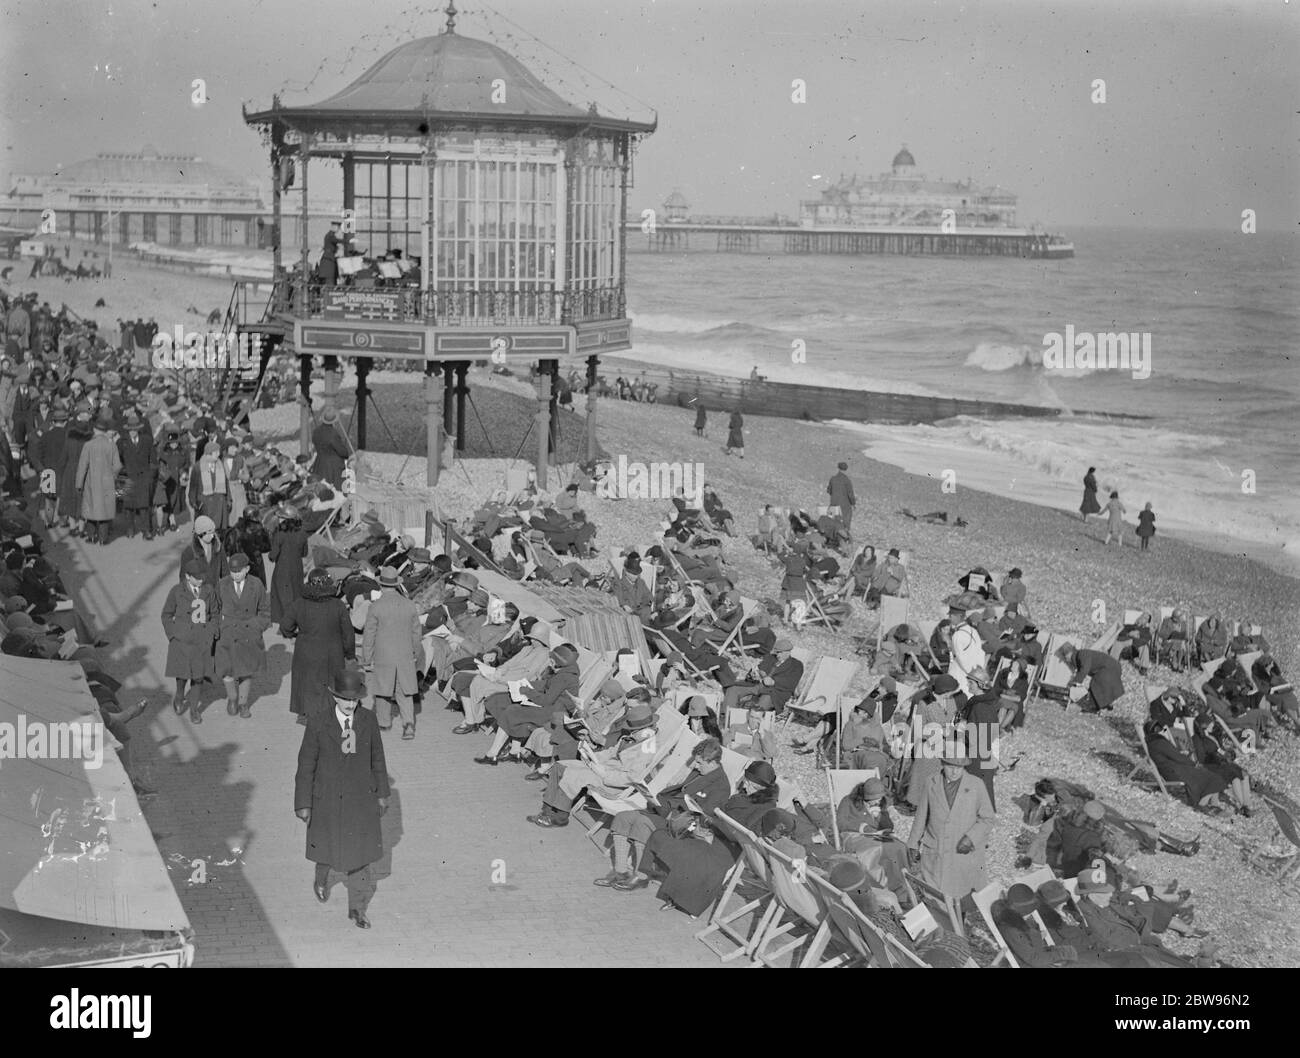 Holiday beach loungers at Eastbourne . So warm has been the weather on the south coast that visitors have been enjoying the sunshine and sea breezes lounging on the beach . The scene on the beach at Eastbourne in the sunny weather .27 March 1932 Stock Photo